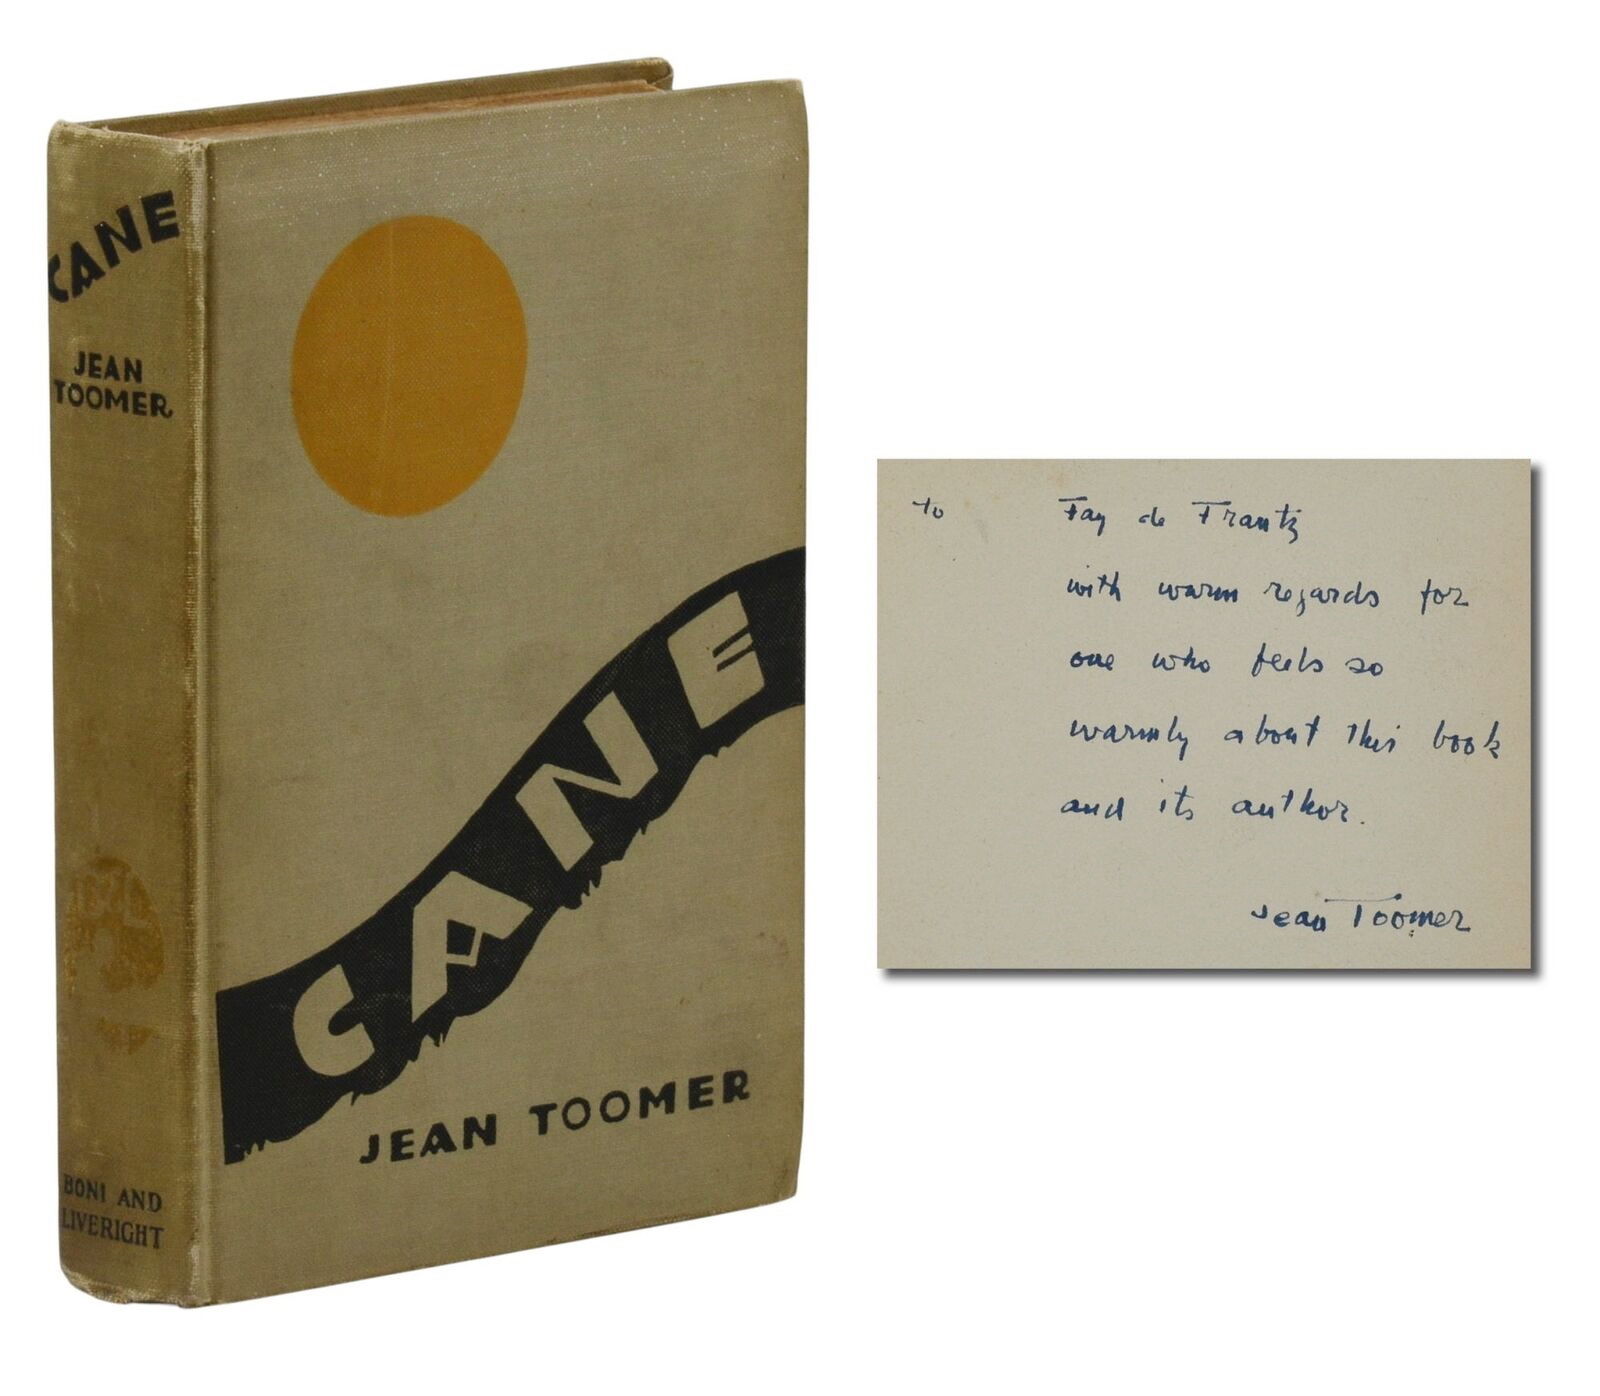 Cane, Jean Toomer, First Edtion